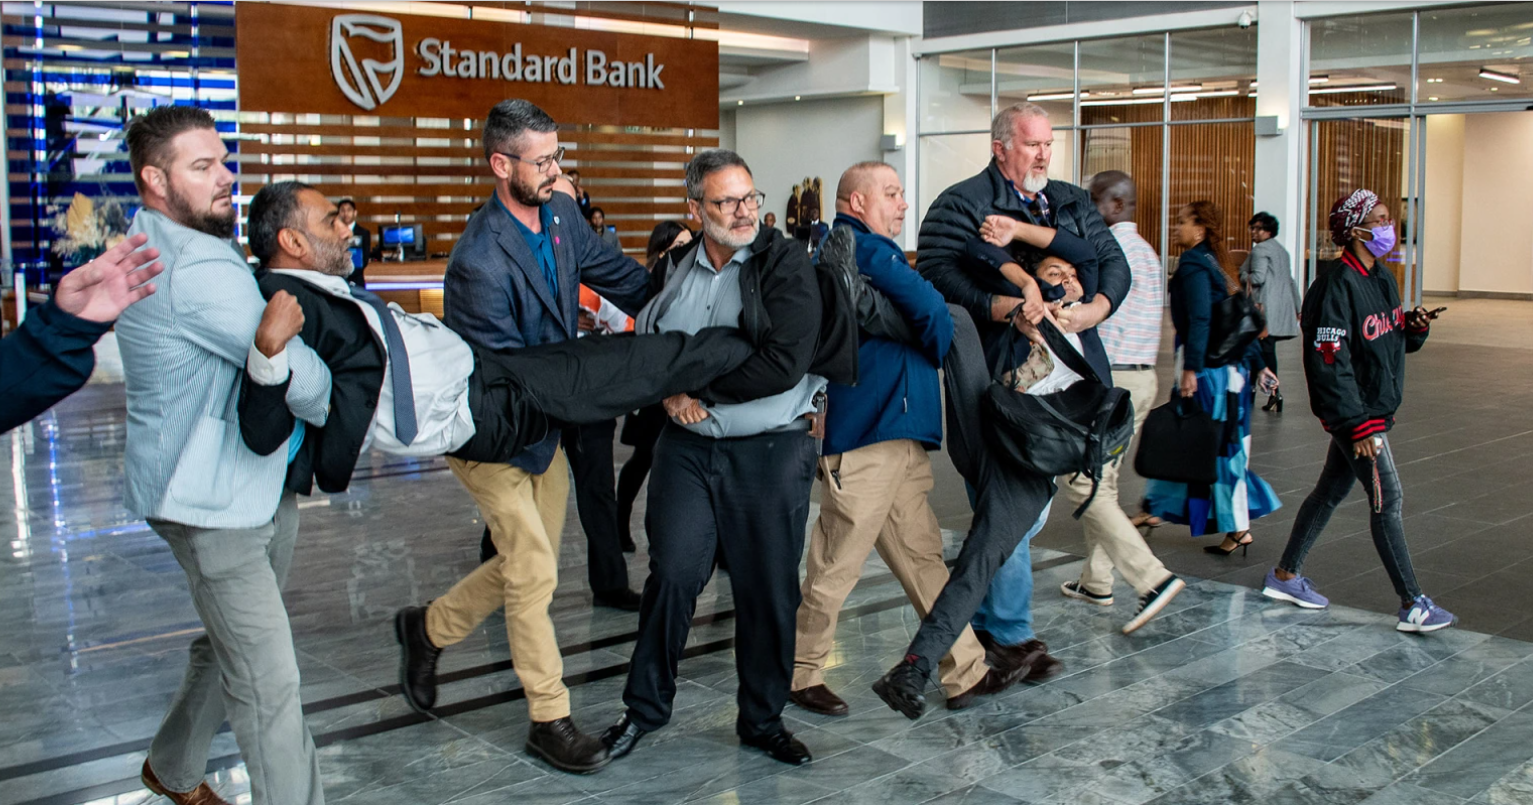 Kumi Naidoo forcibly removed from Standard Bank HQ after protest over crude oil pipeline project (By Julia Evans)